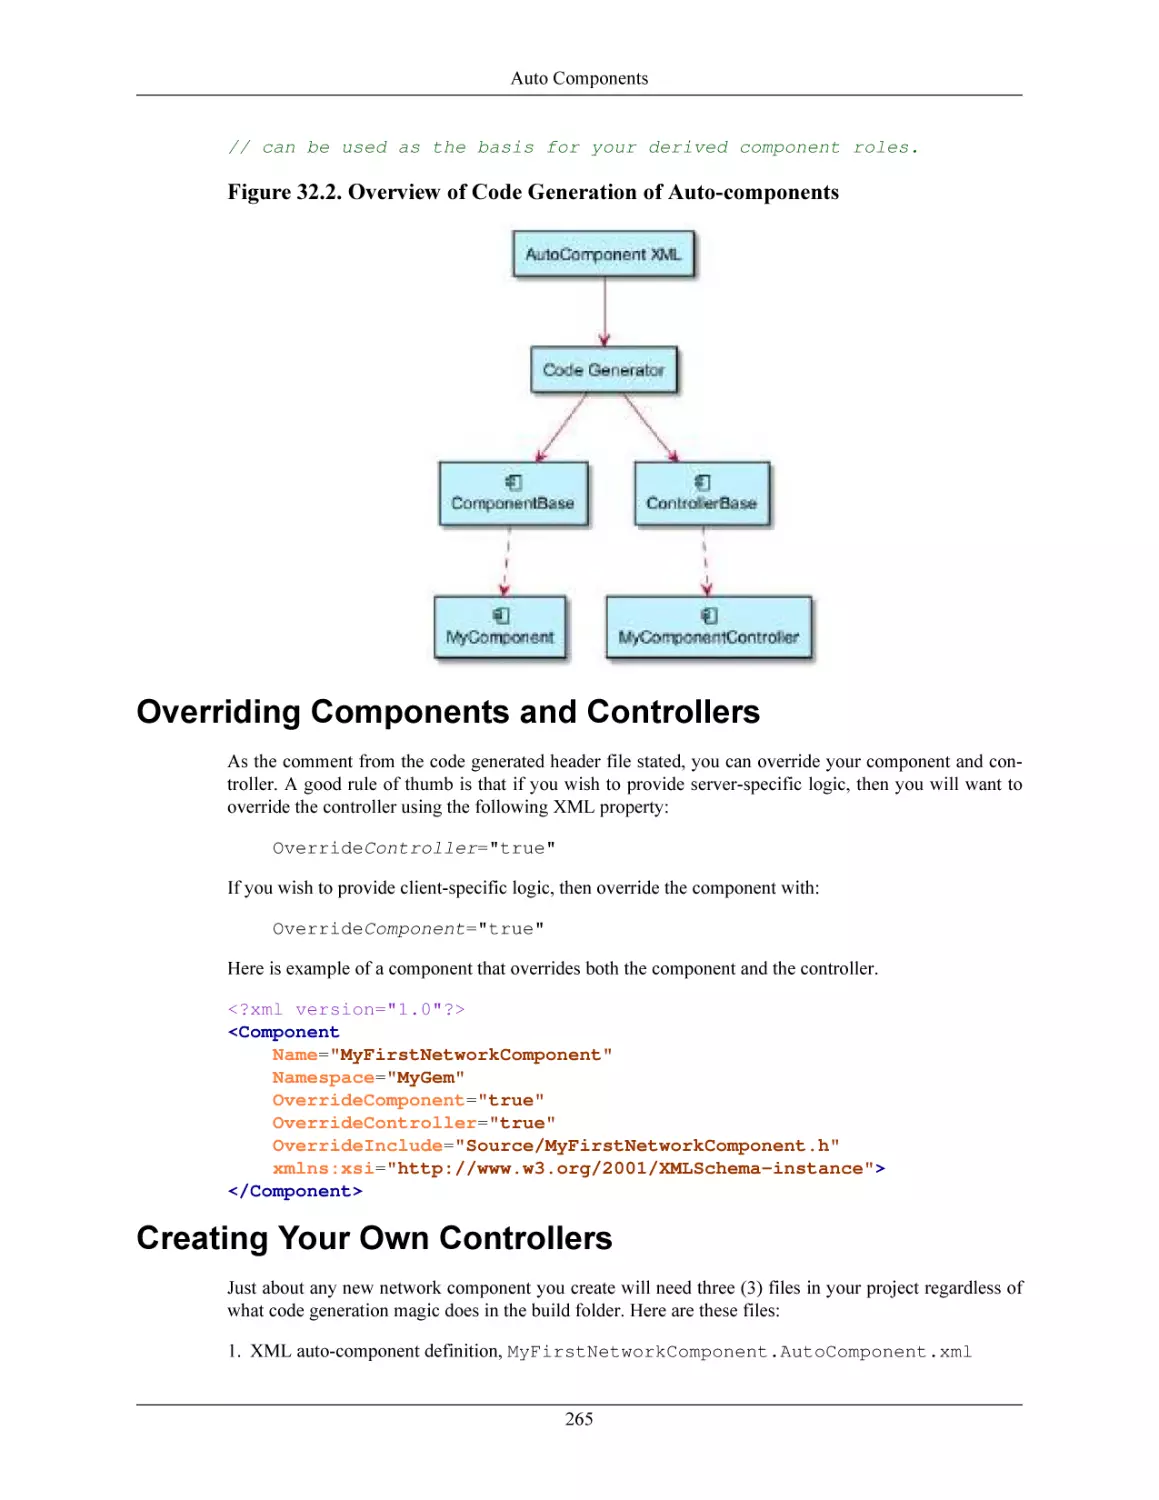 Overriding Components and Controllers
Creating Your Own Controllers